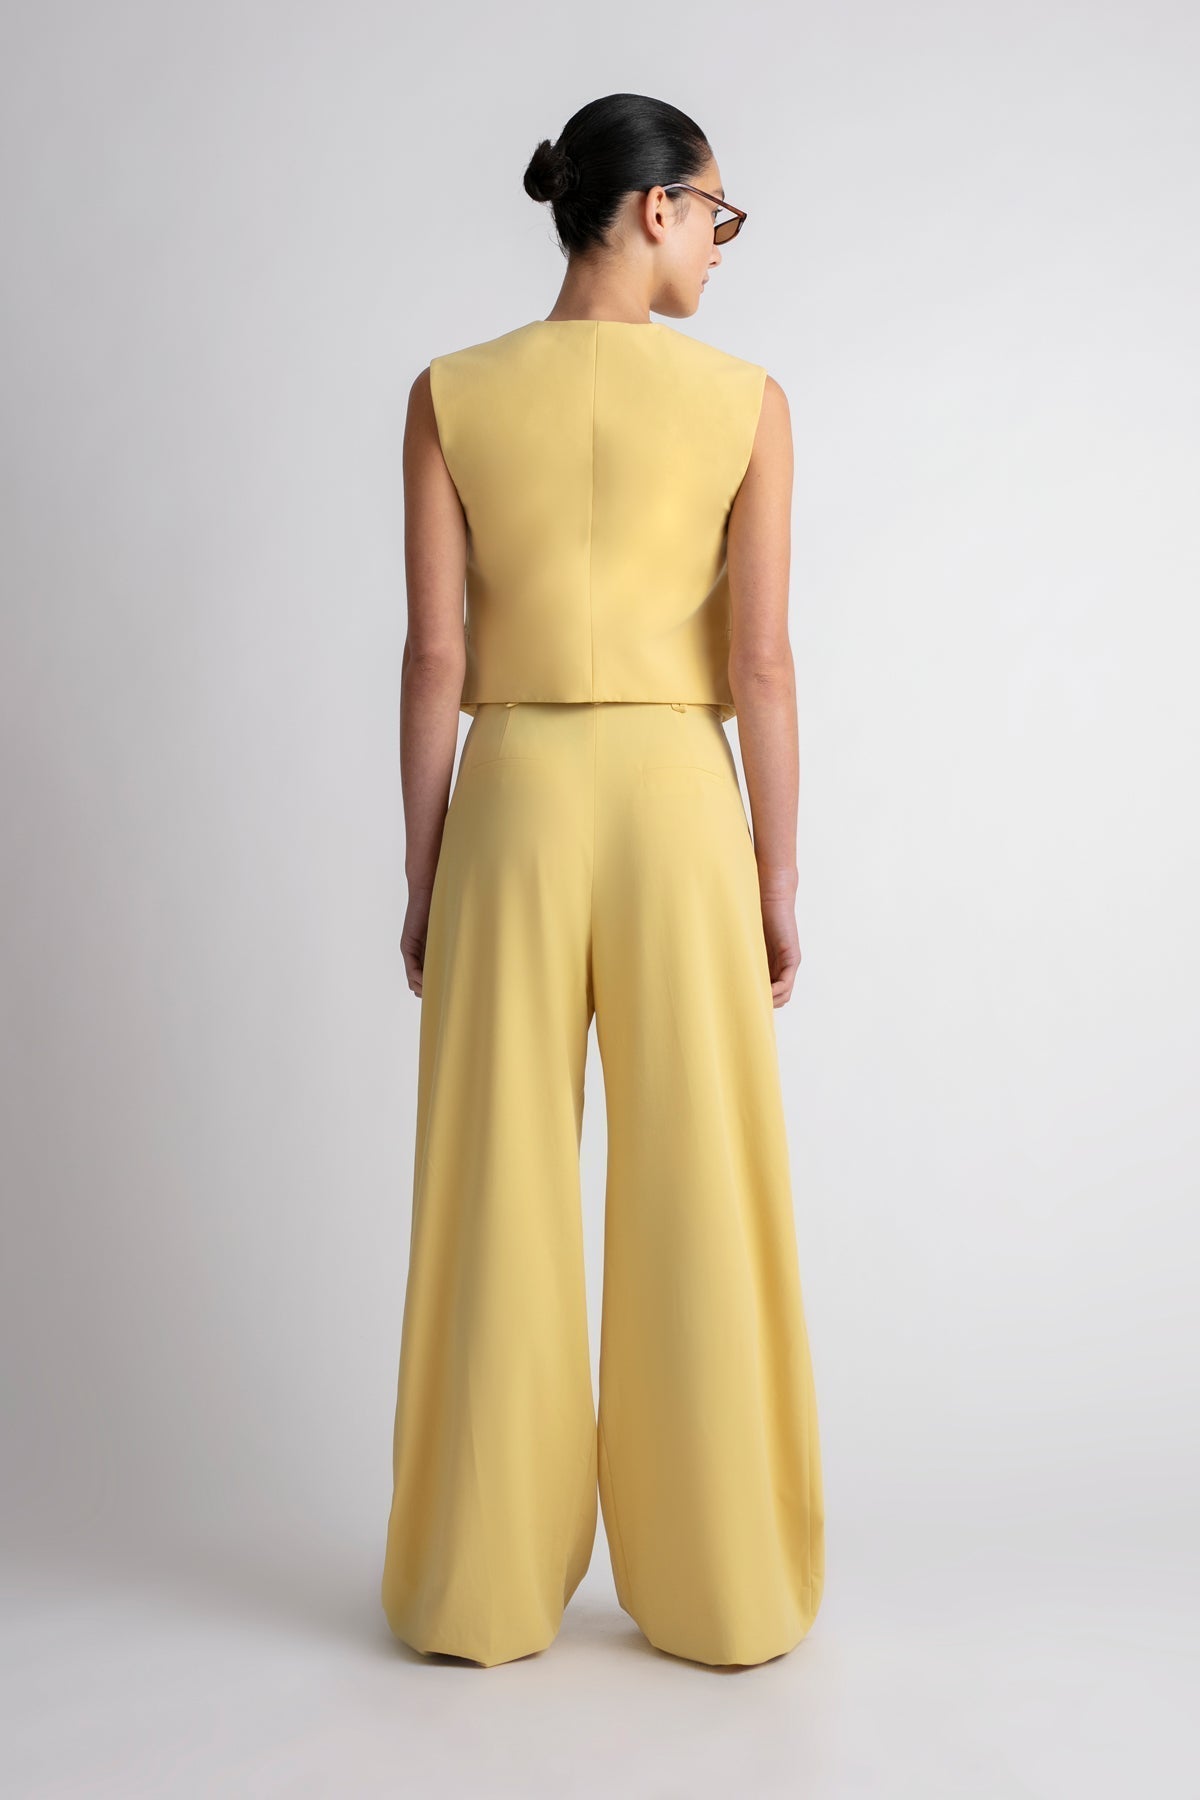 CAMILLA & MARC - LAINE WIDE LEG PANT AND VEST - YELLOW - PRELOVED